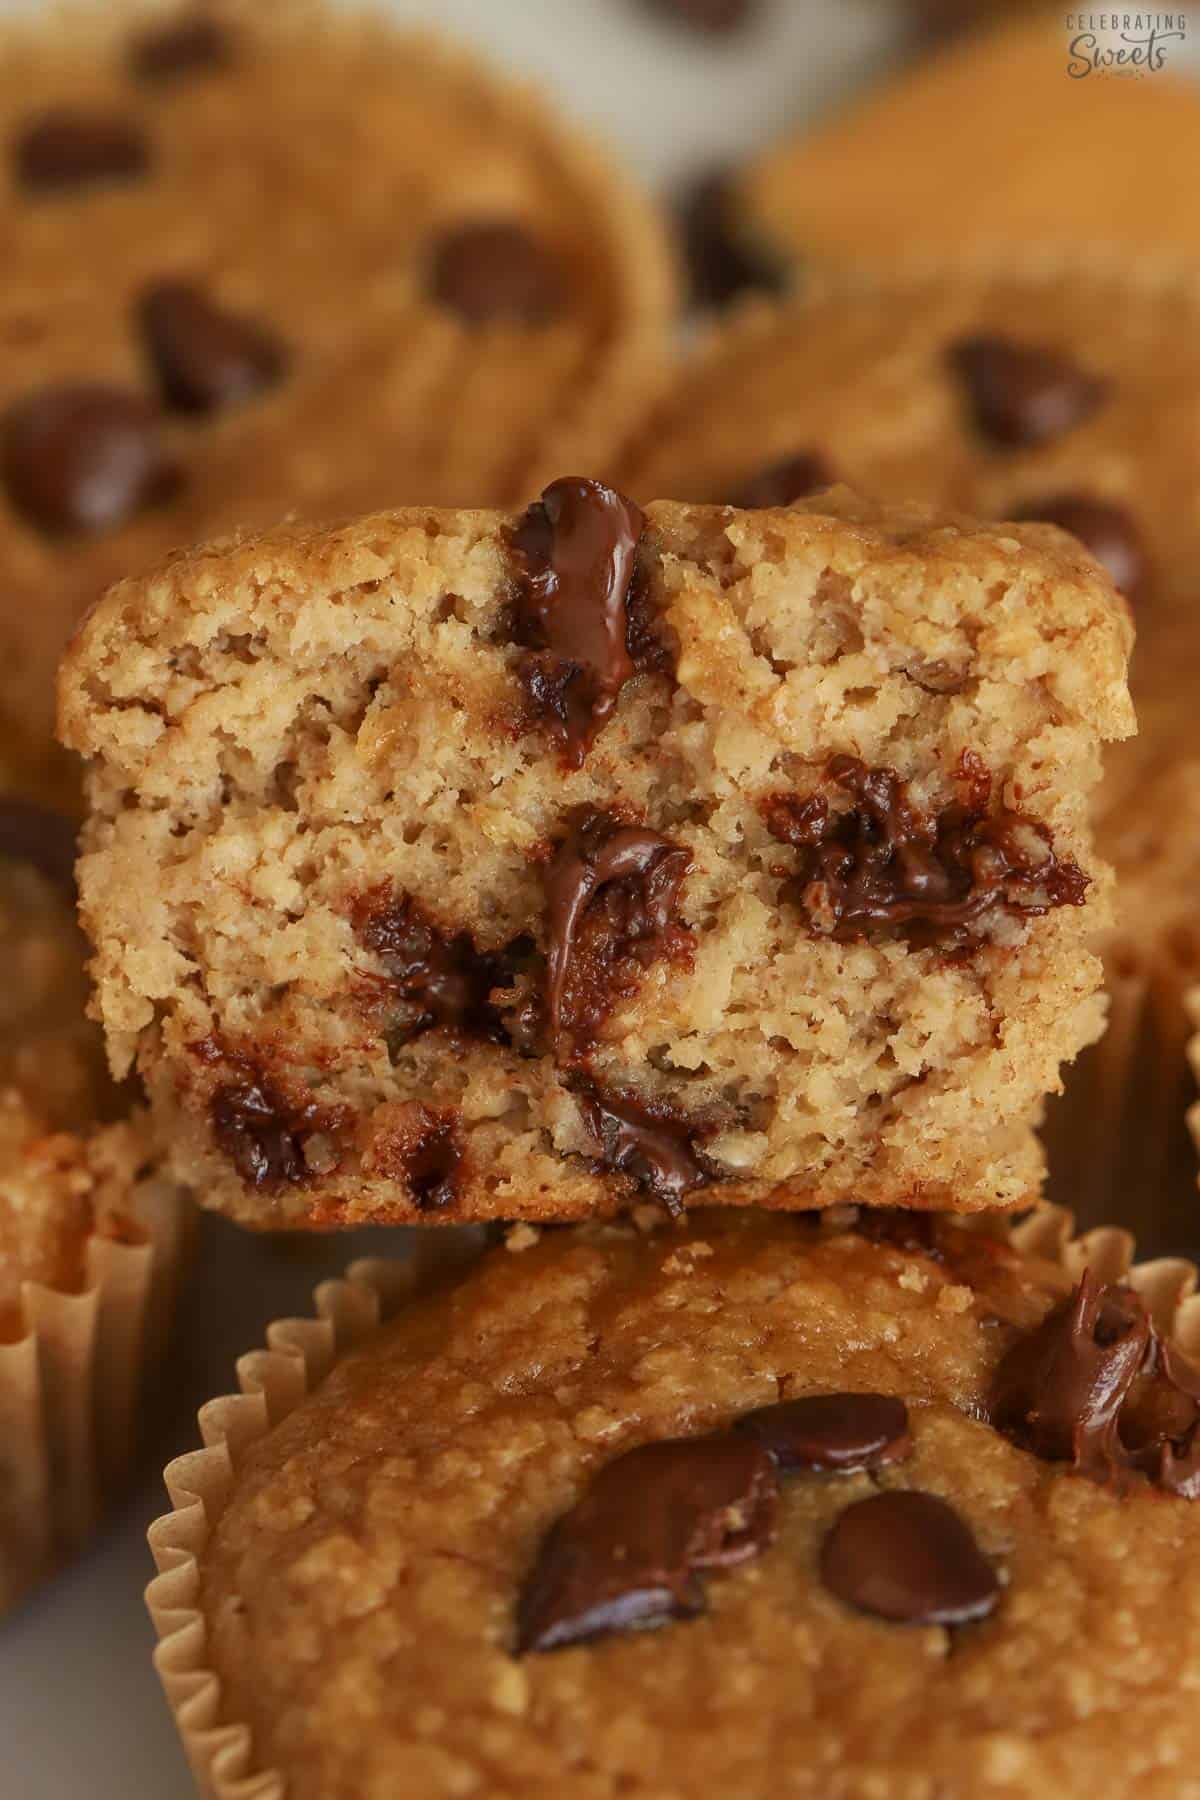 Closeup of a banana oatmeal muffin with chocolate chips in it.